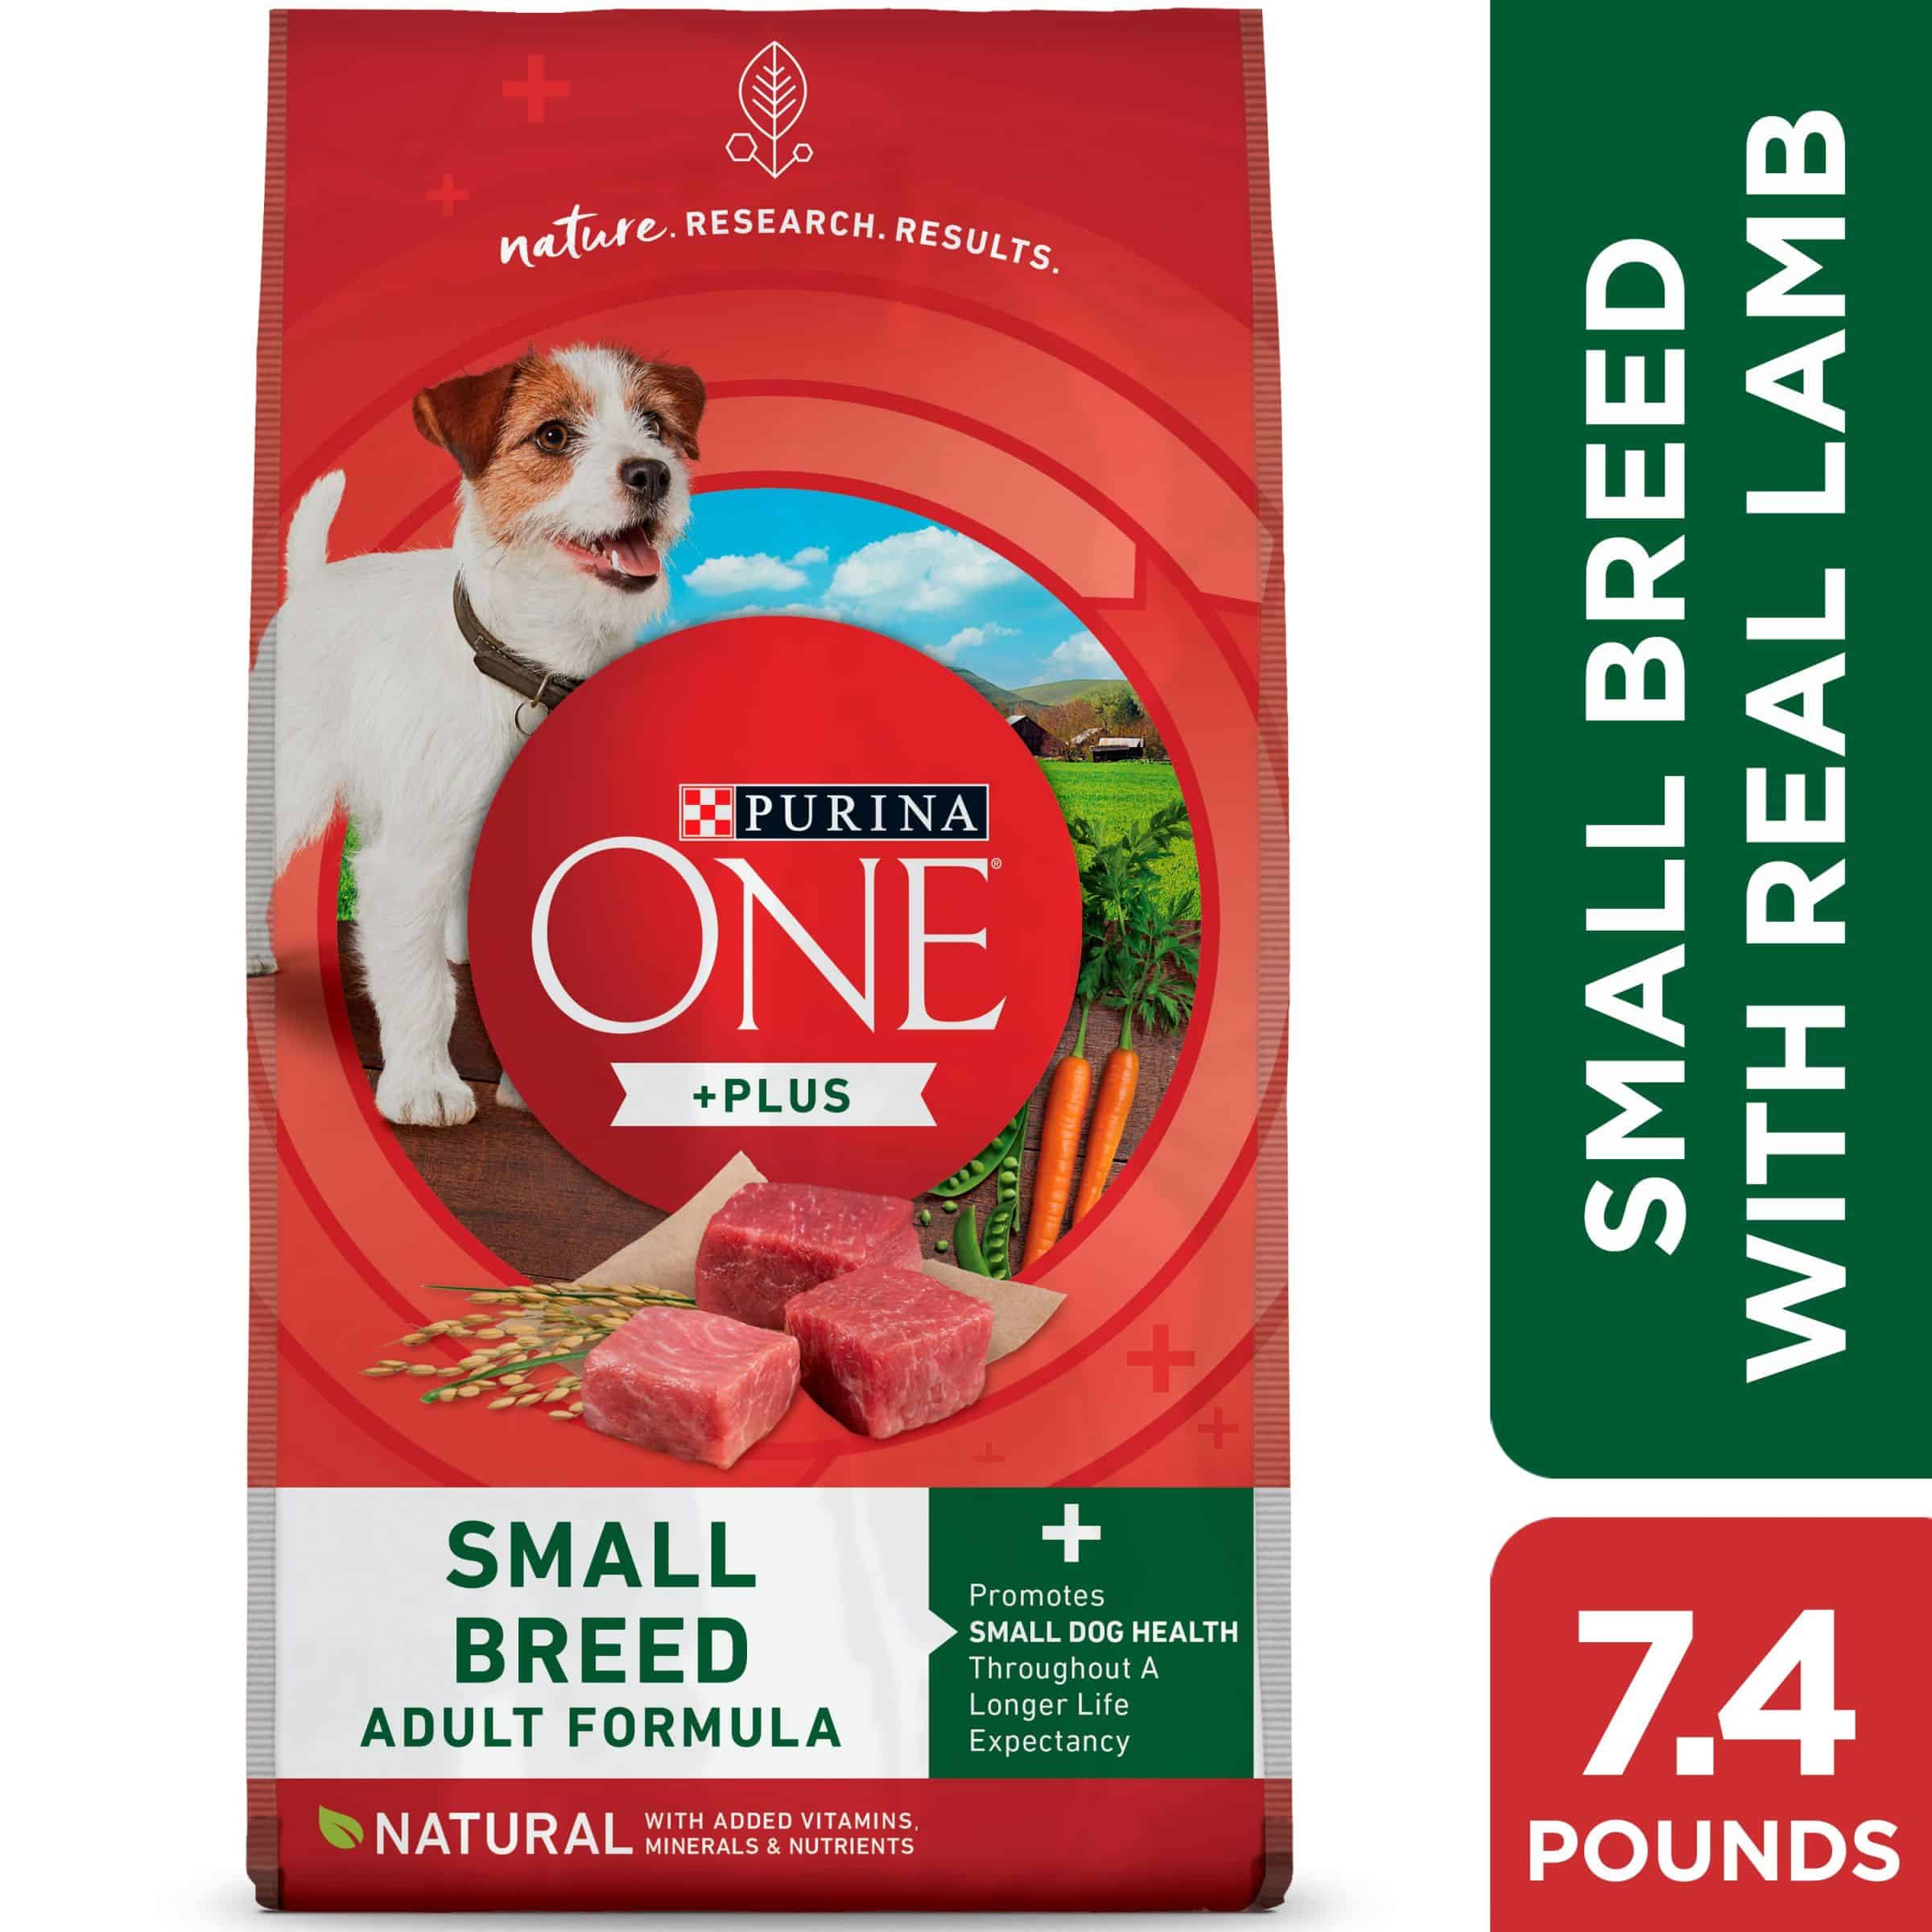 Purina One Plus Small Breed